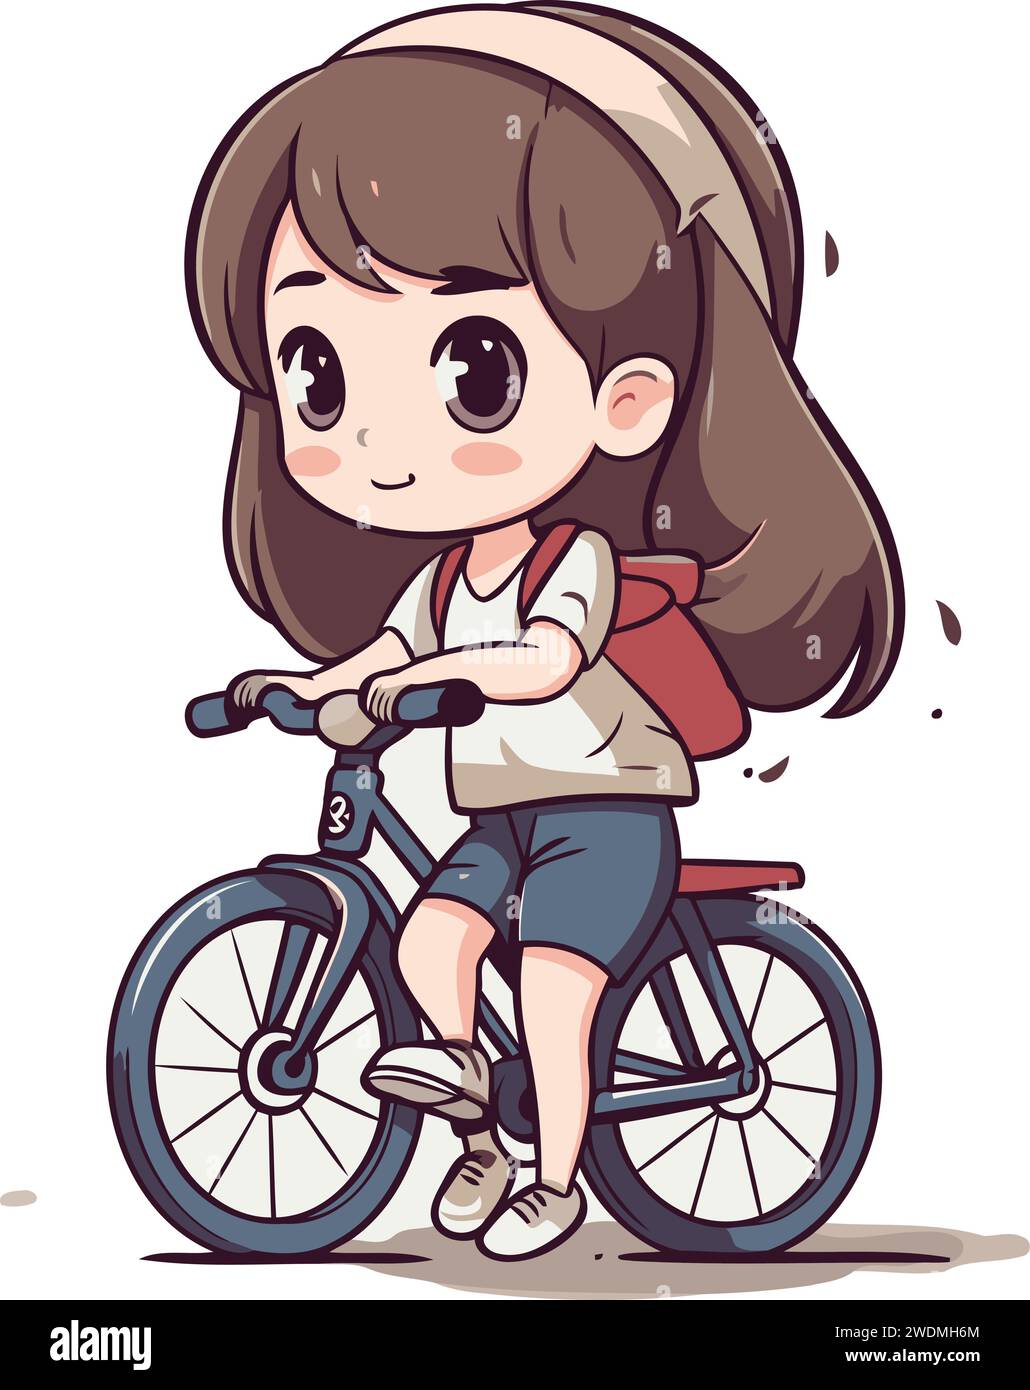 Cute little girl in school uniform riding bicycle. Vector illustration. Stock Vector